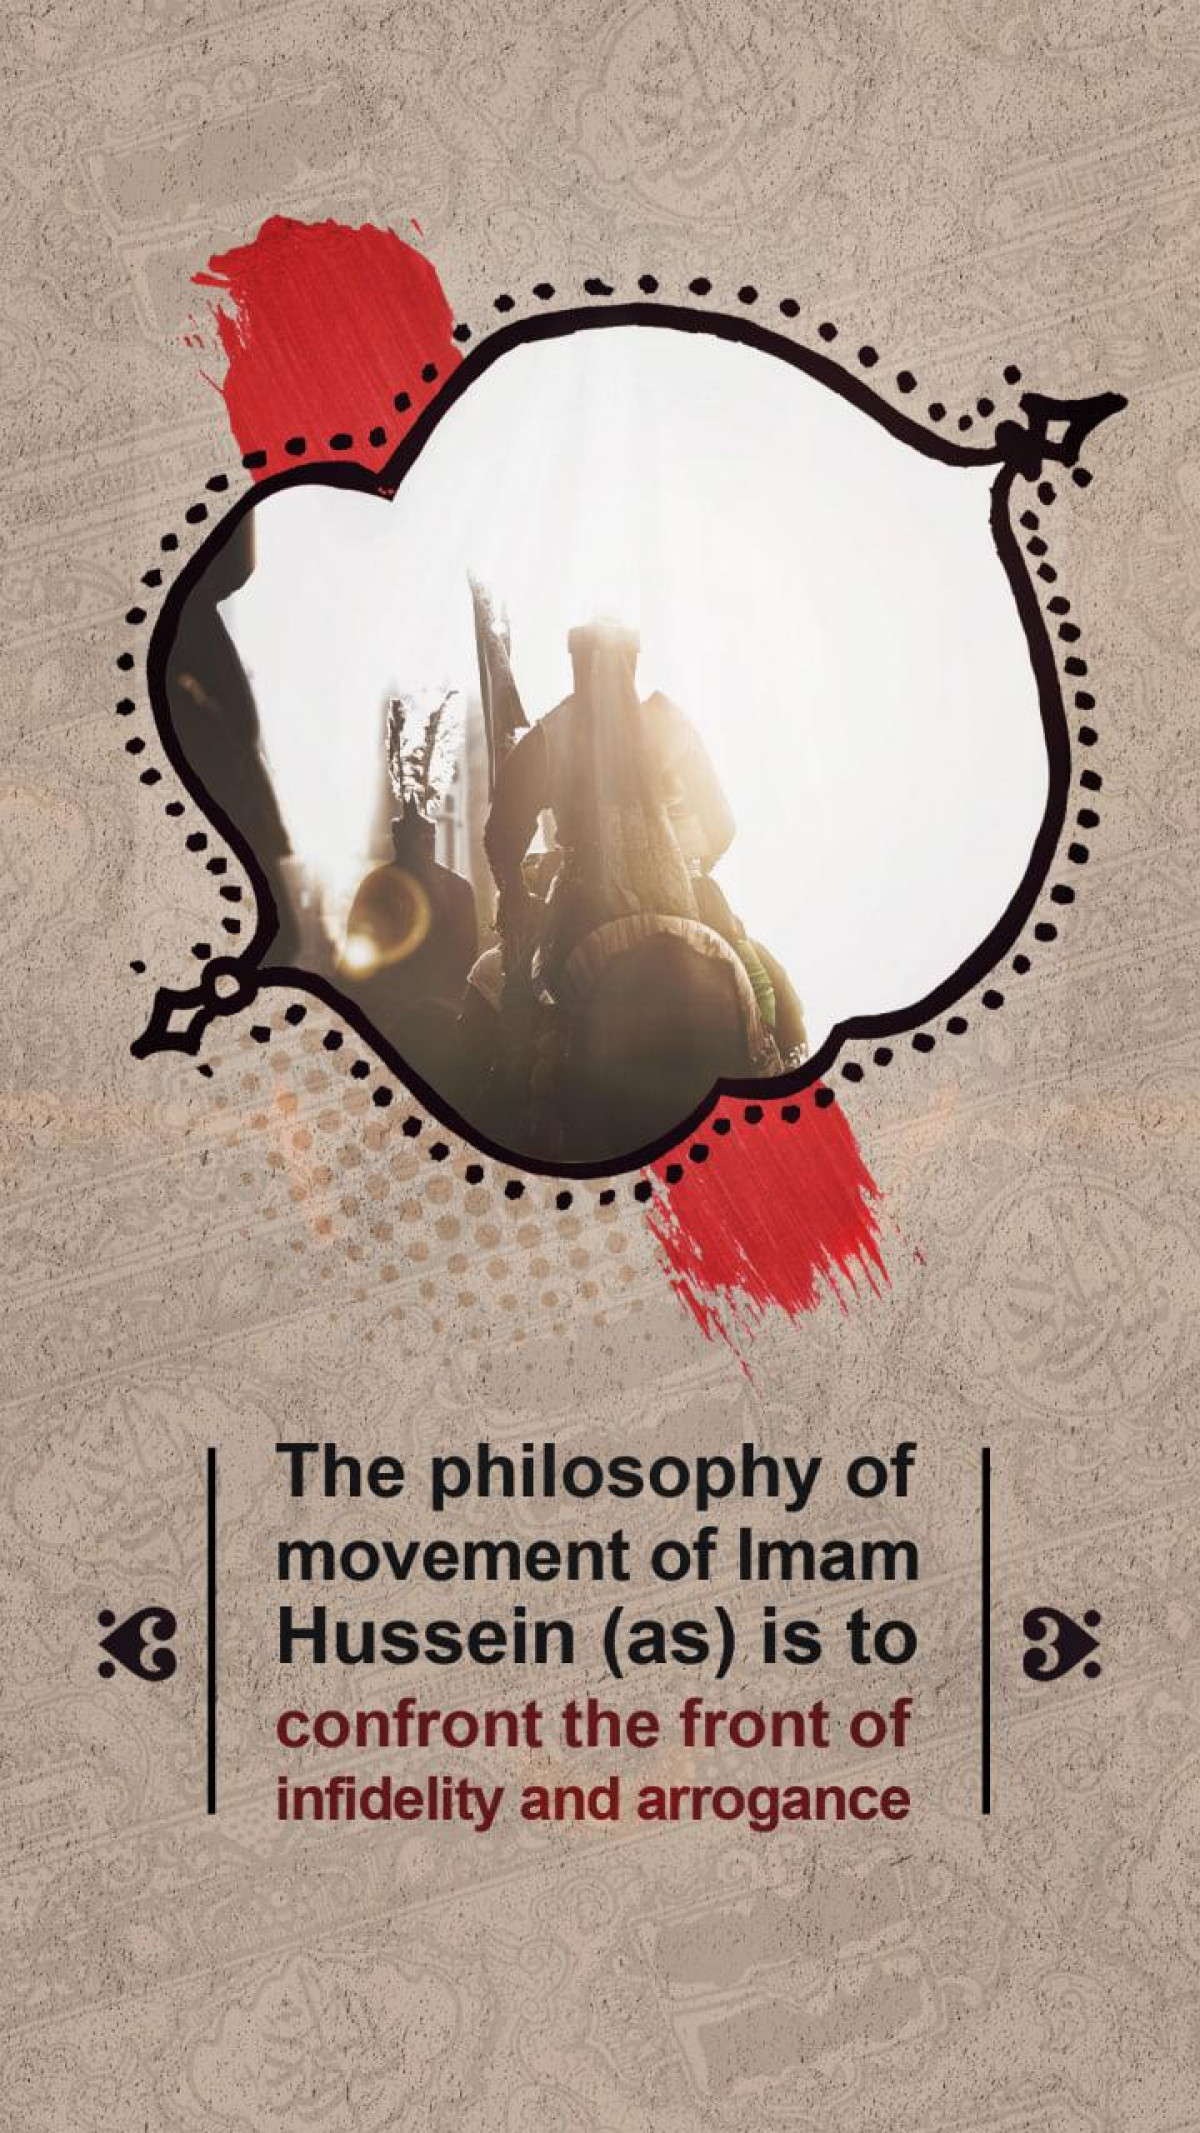 The philosophy of movement of Imam Hussein (as) is to confront the front of infidelity and arrogance